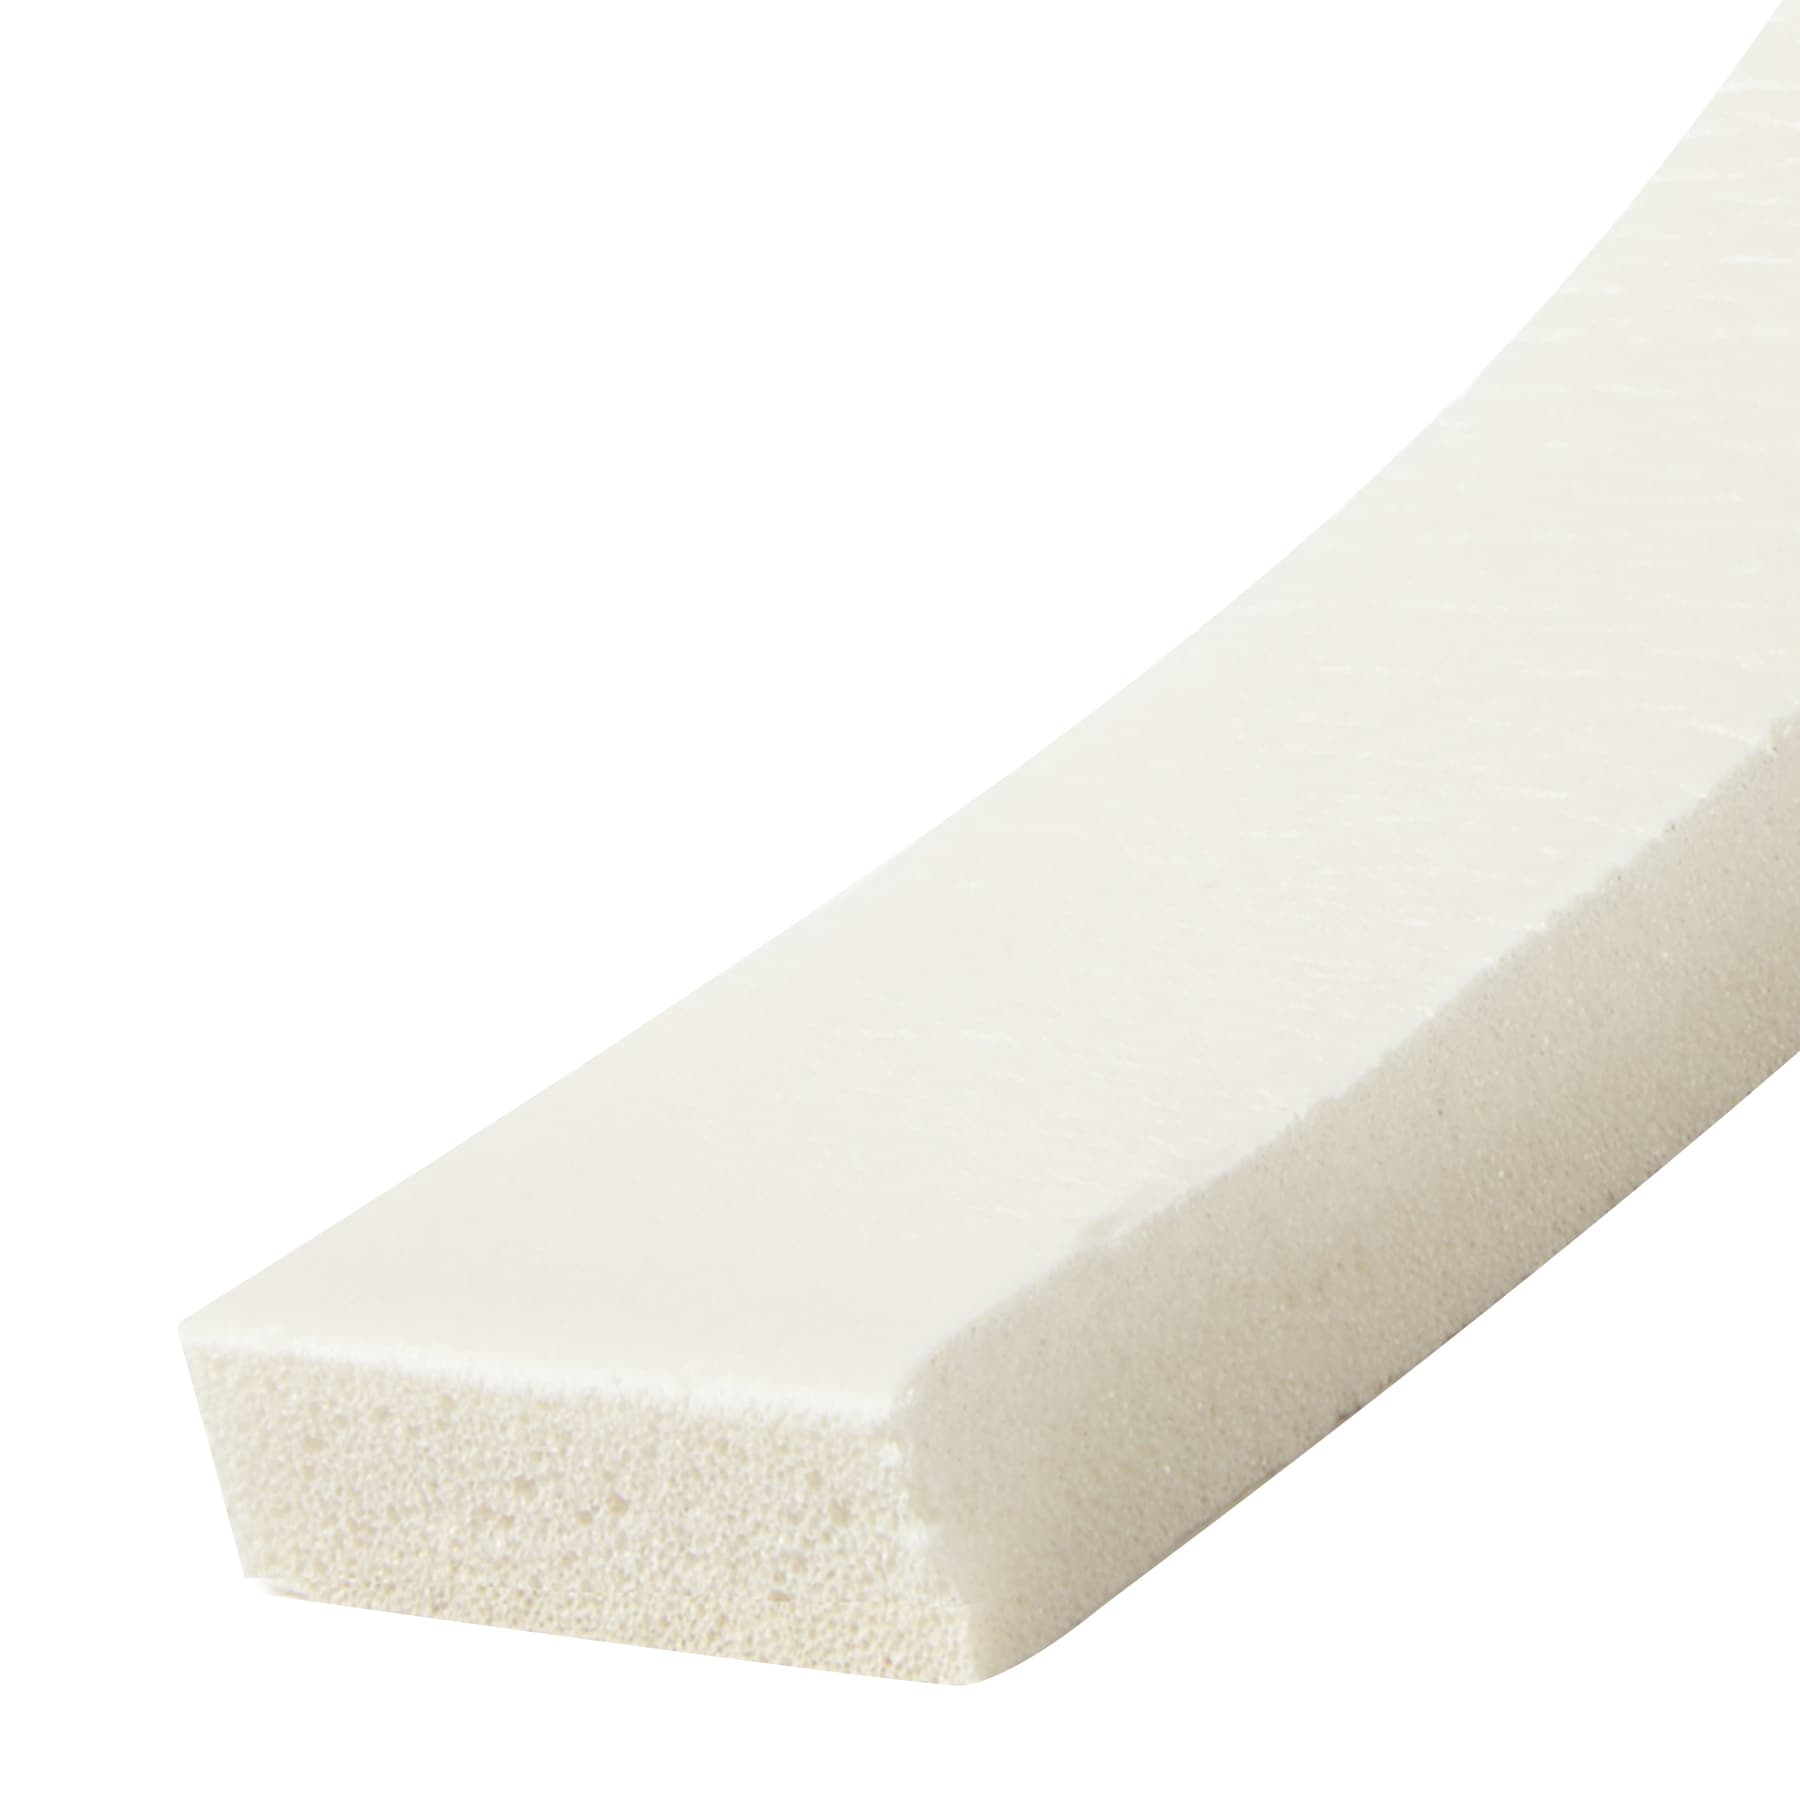 Frost King 1-1/4 in. x 7/16 in. x 10 ft. White High-Density Rubber